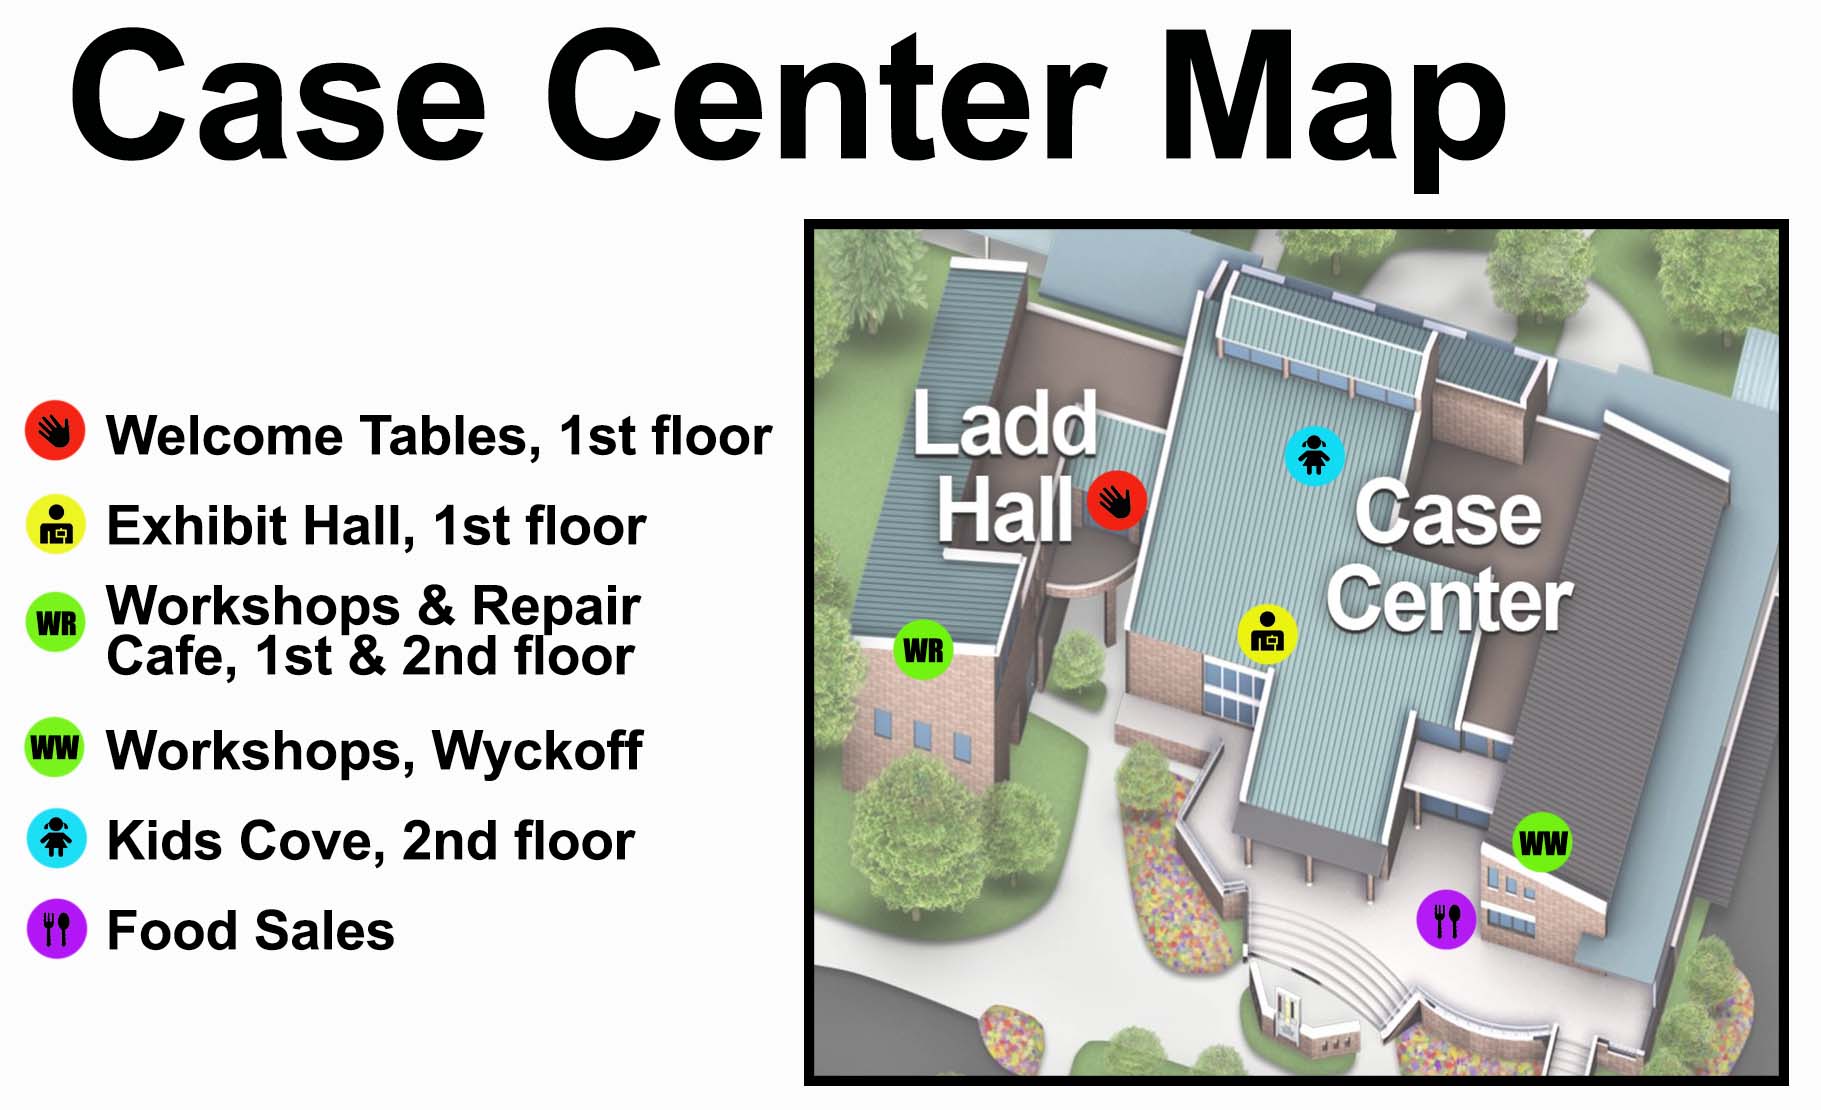 Case is the hub for the day's workshops and expo hall. Check in with the welcome table in 1st floor Case by the main entrance for more information